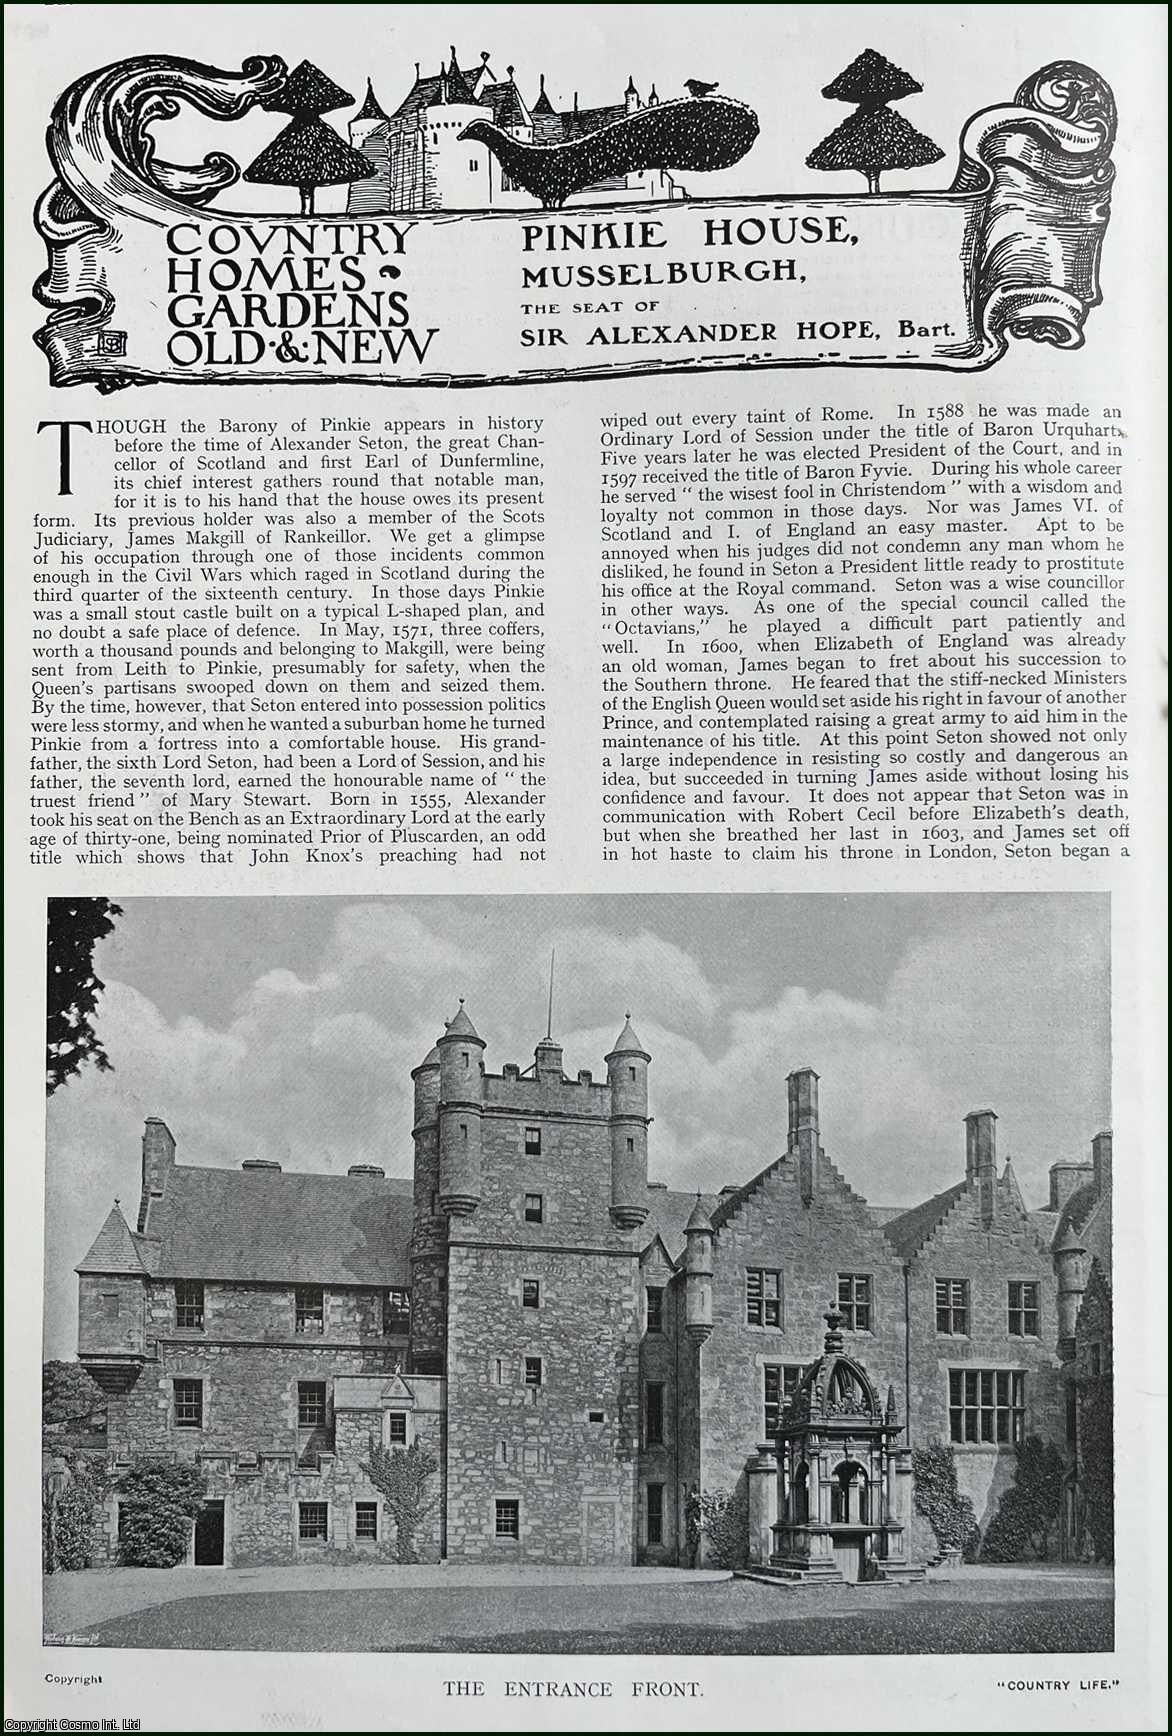 Country Life Magazine - Pinkie House, Musselburgh. Several pictures and accompanying text, removed from an original issue of Country Life Magazine, 1911.